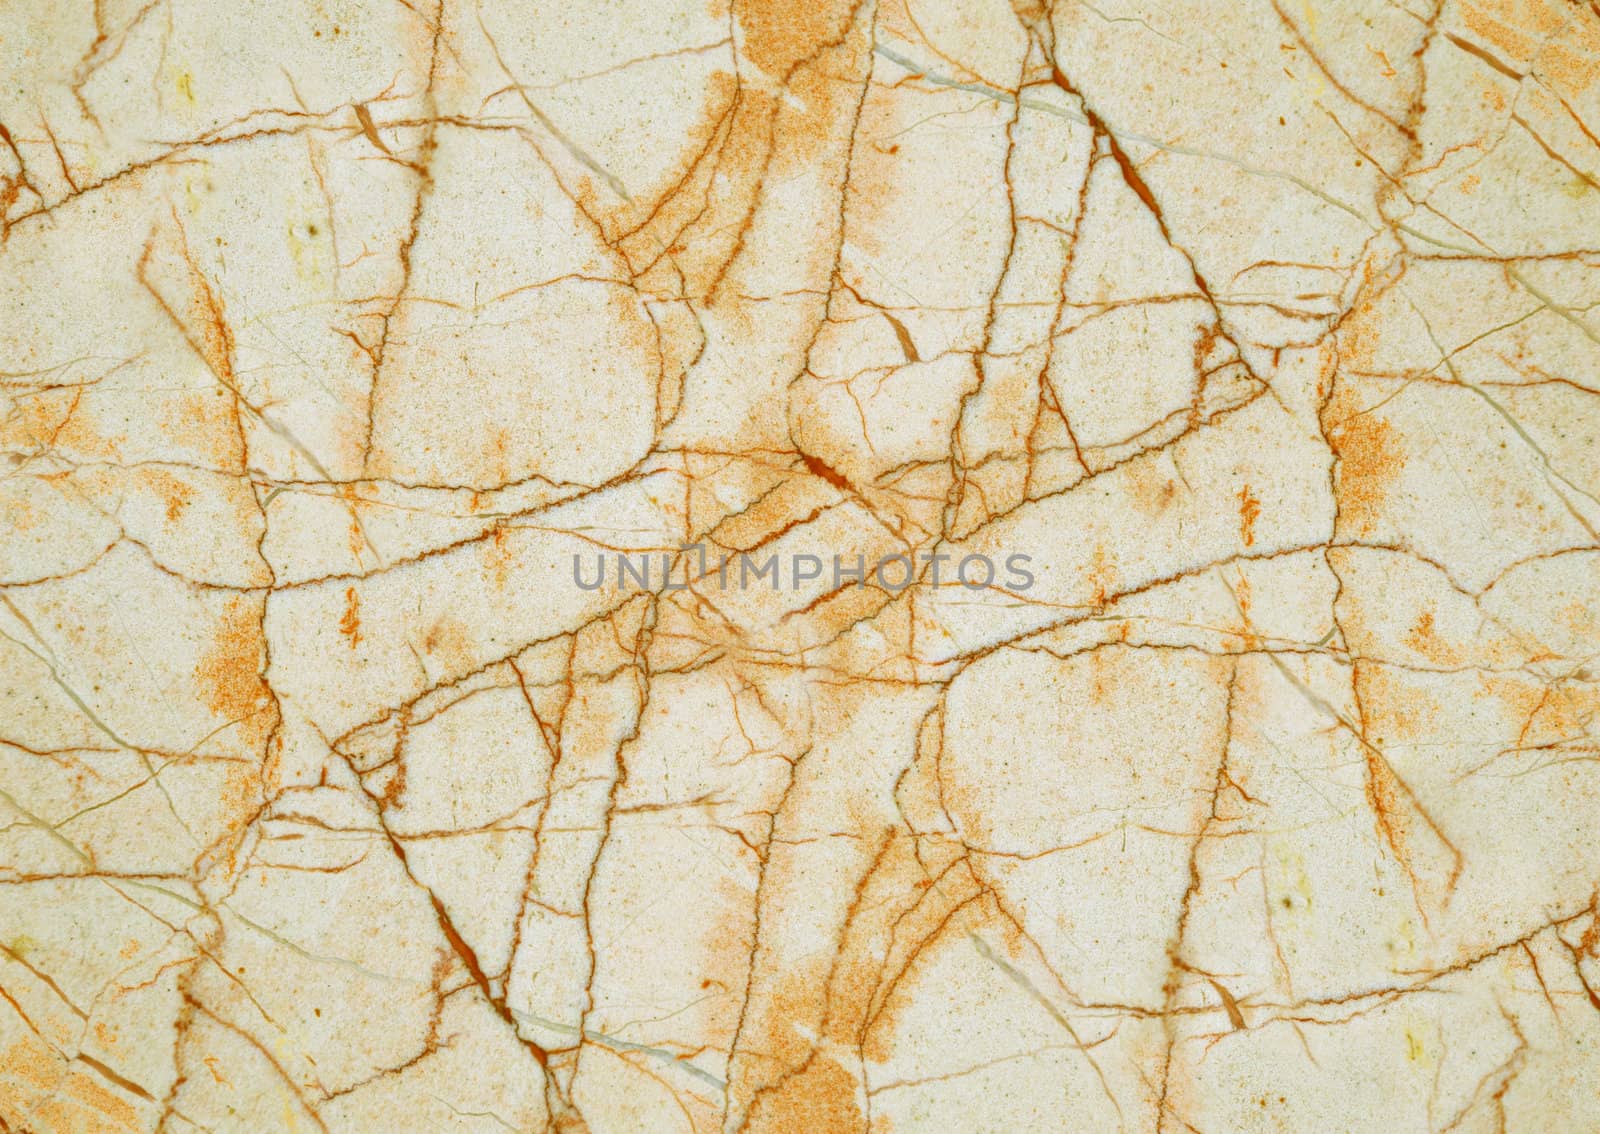 Brown marble texture (high resolution core tissue)